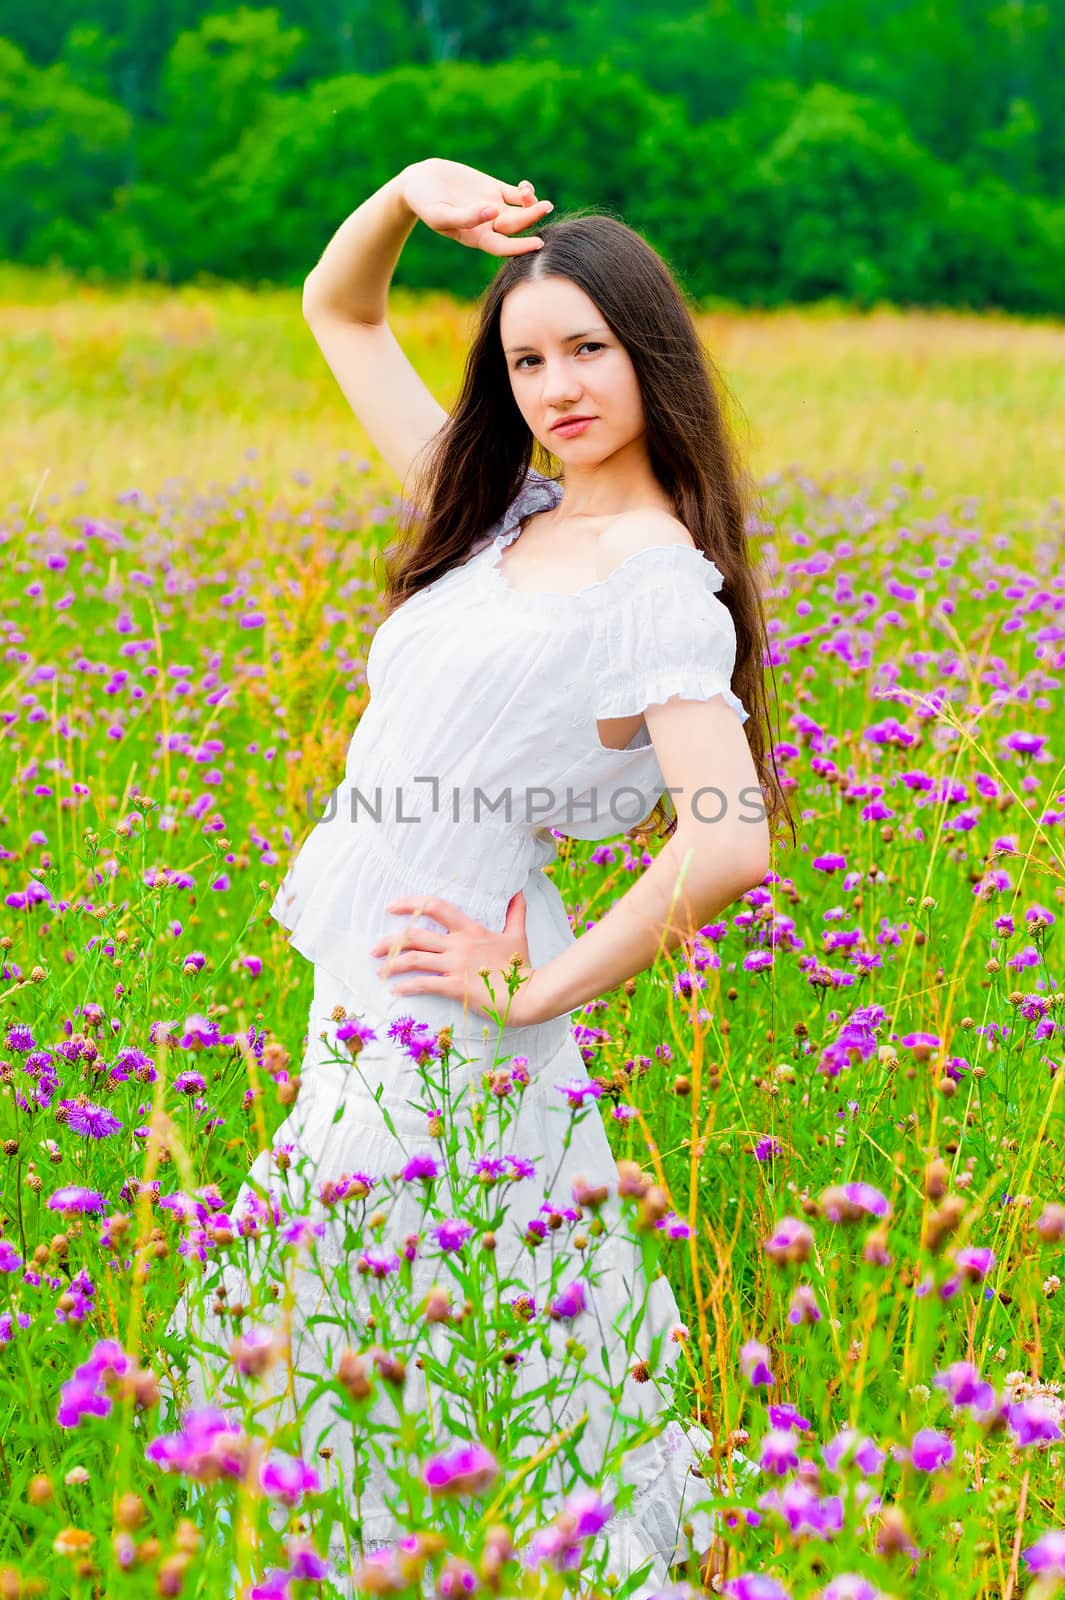 beautiful woman posing in a field with flowers